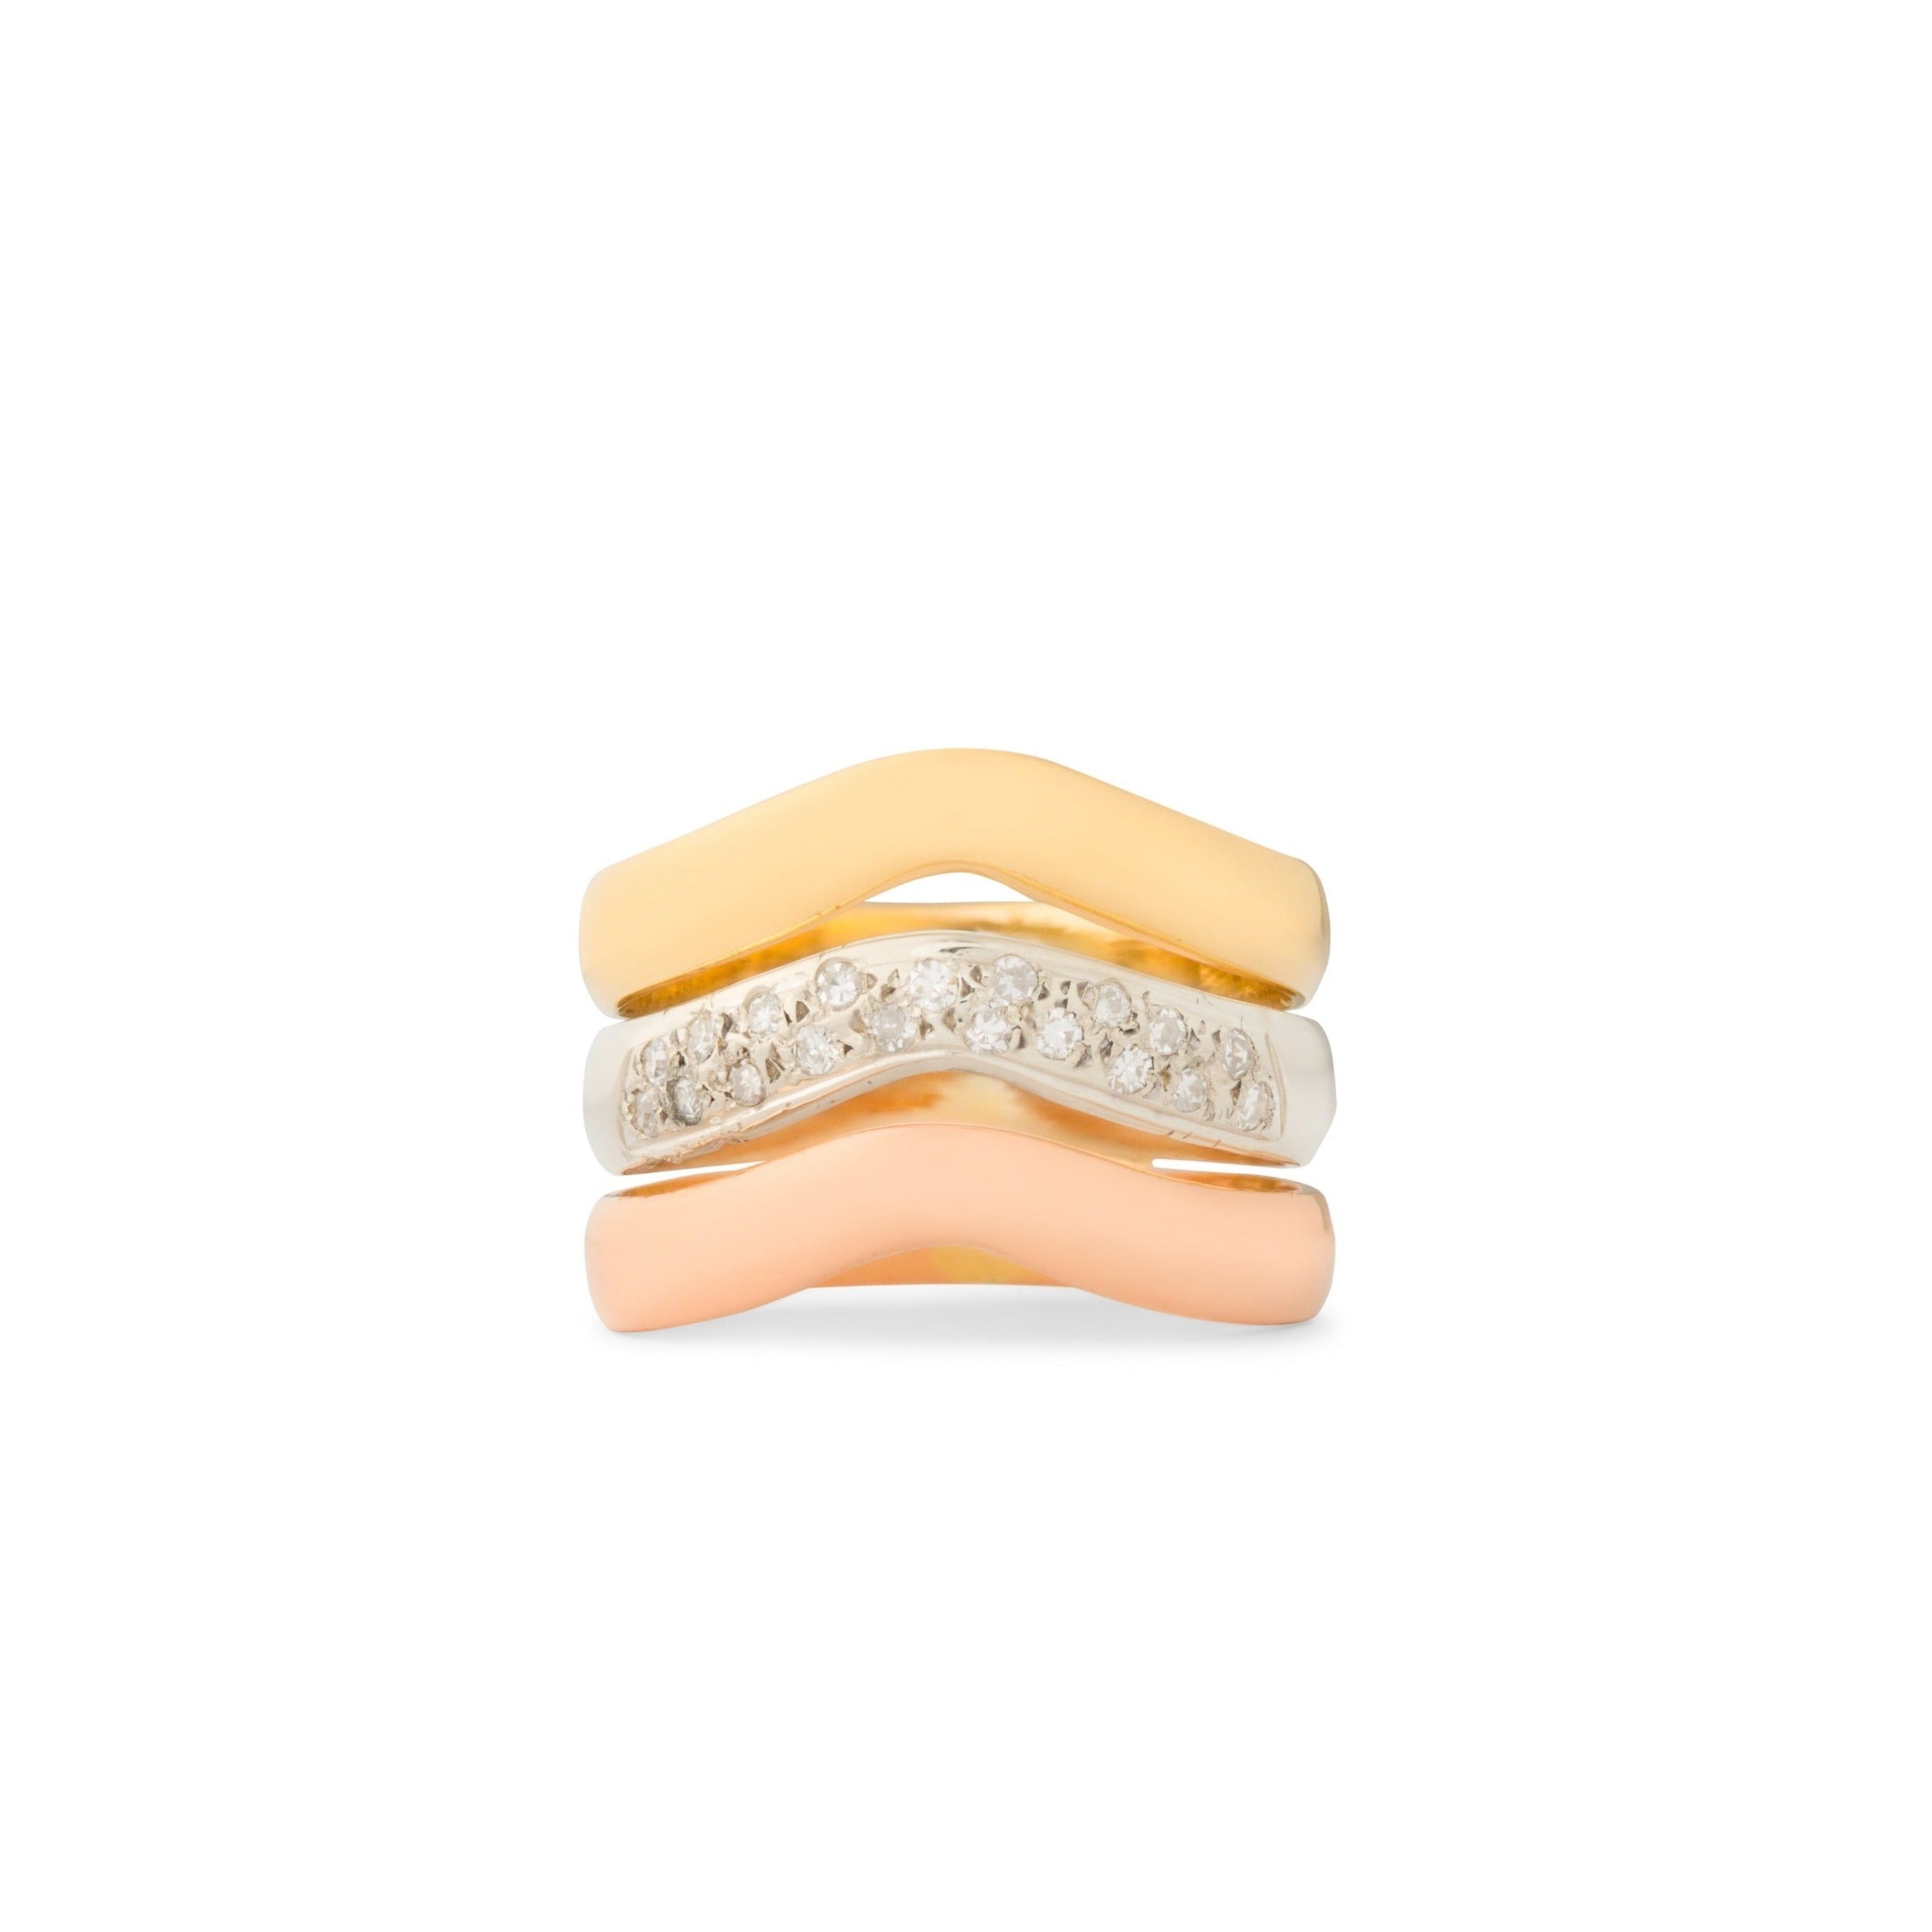 Diamond and 18K Tri-Color Gold Ring